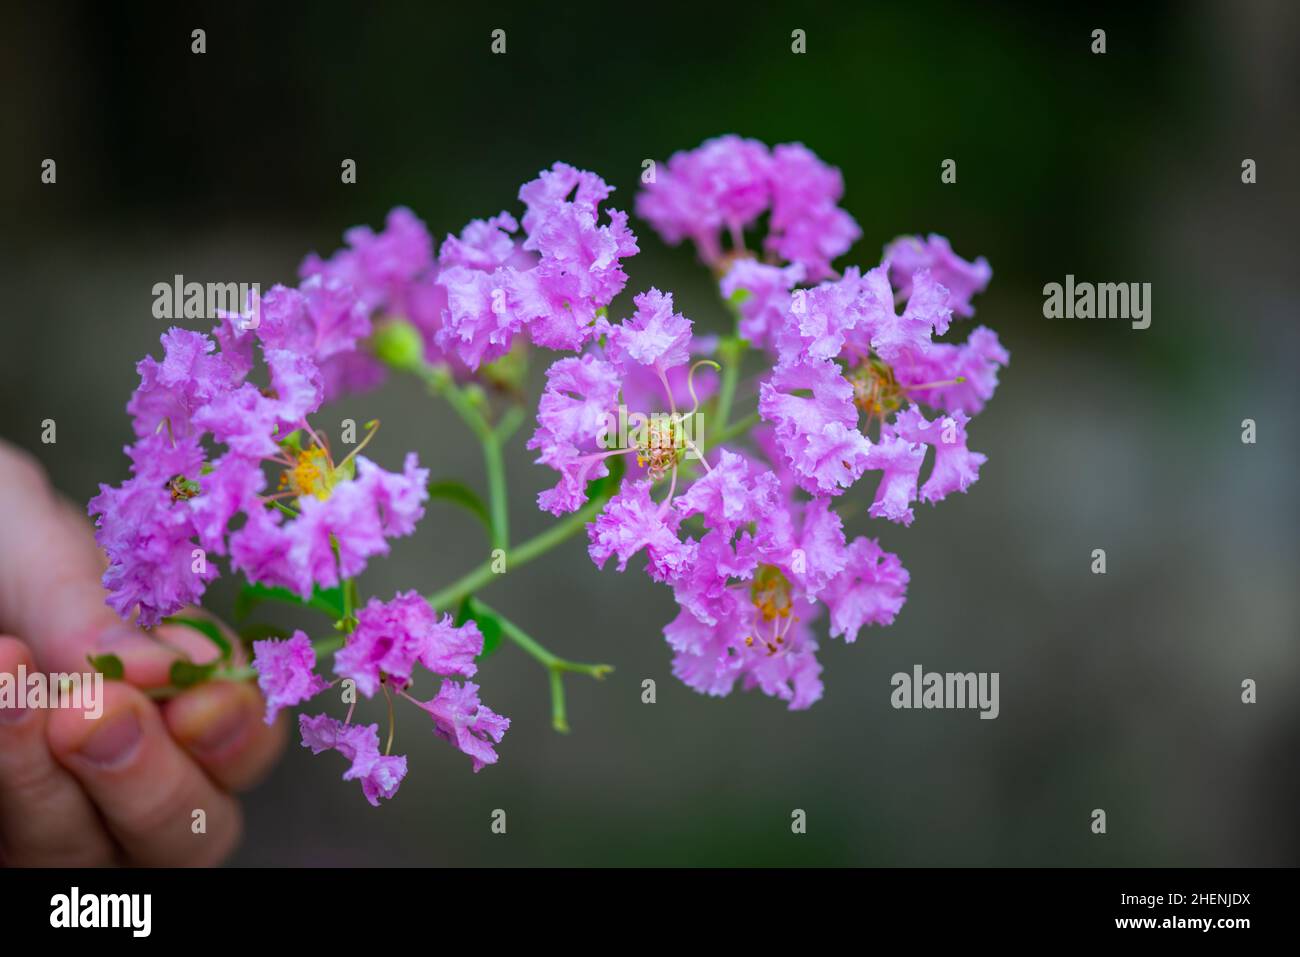 holding a sprig of blooming myrtle in their hands Stock Photo